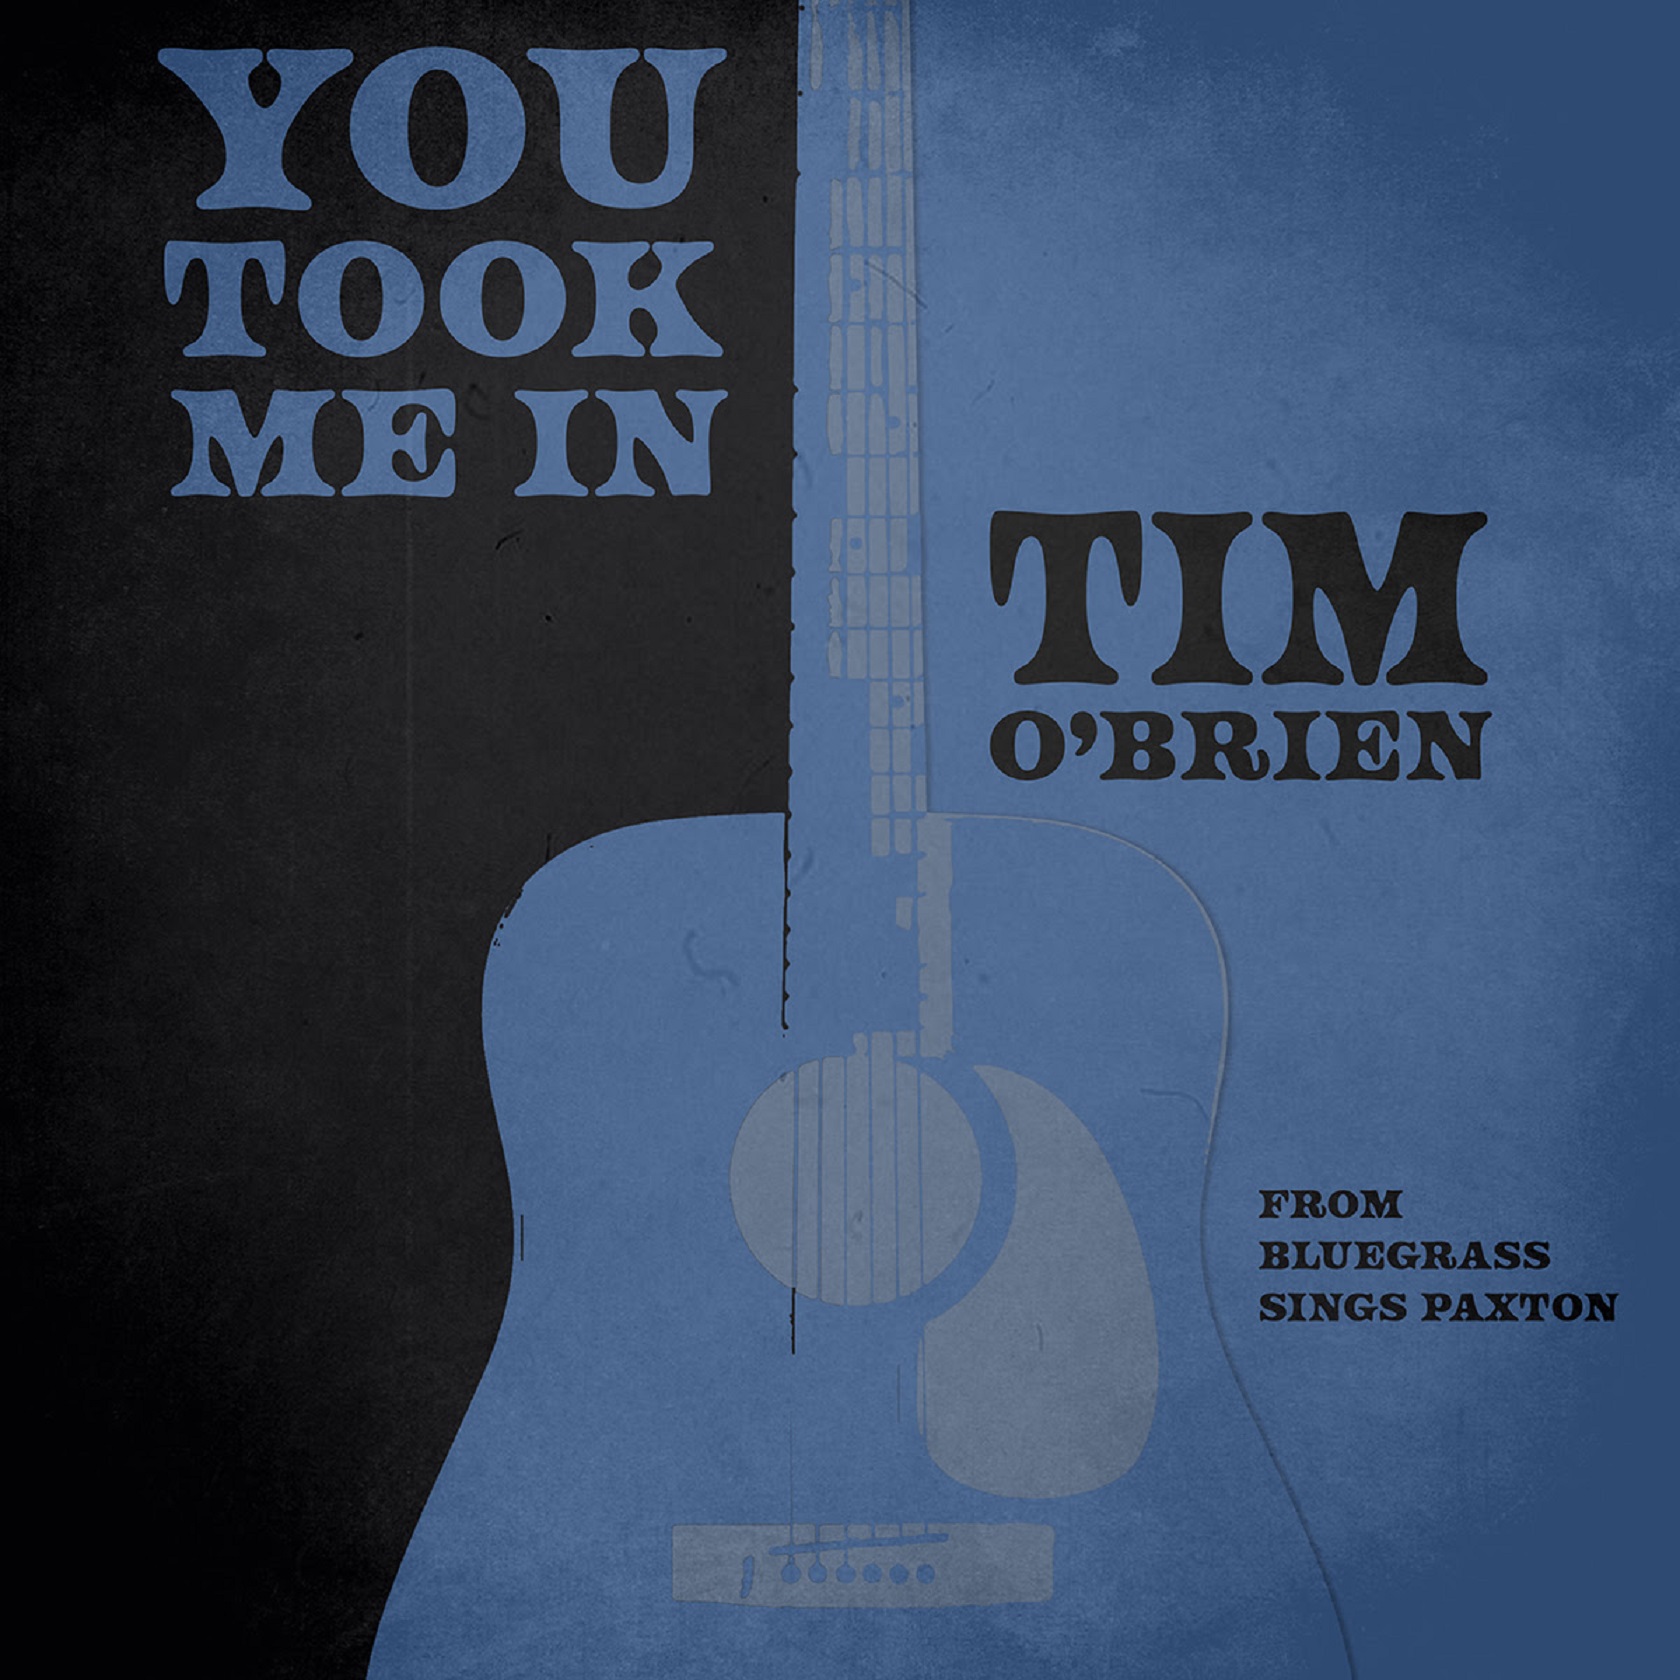 Tim O’Brien offers “You Took Me In" for the second Bluegrass Sings Paxton release